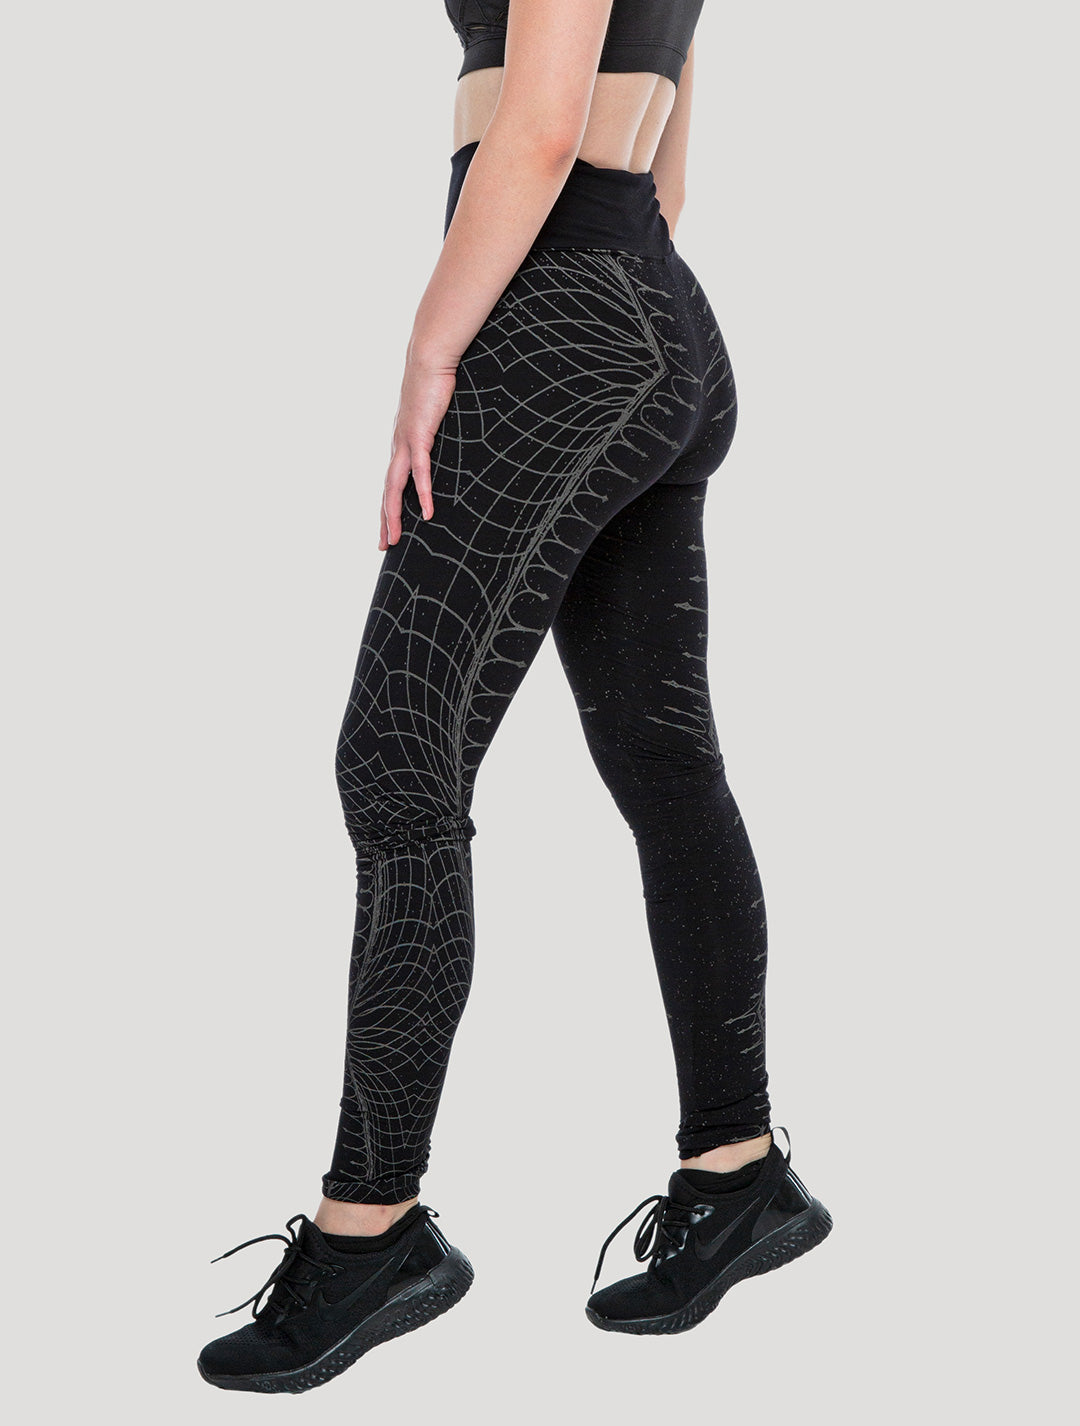 Womens Low Rise Leggings - Fashion Tights in Mystique Black